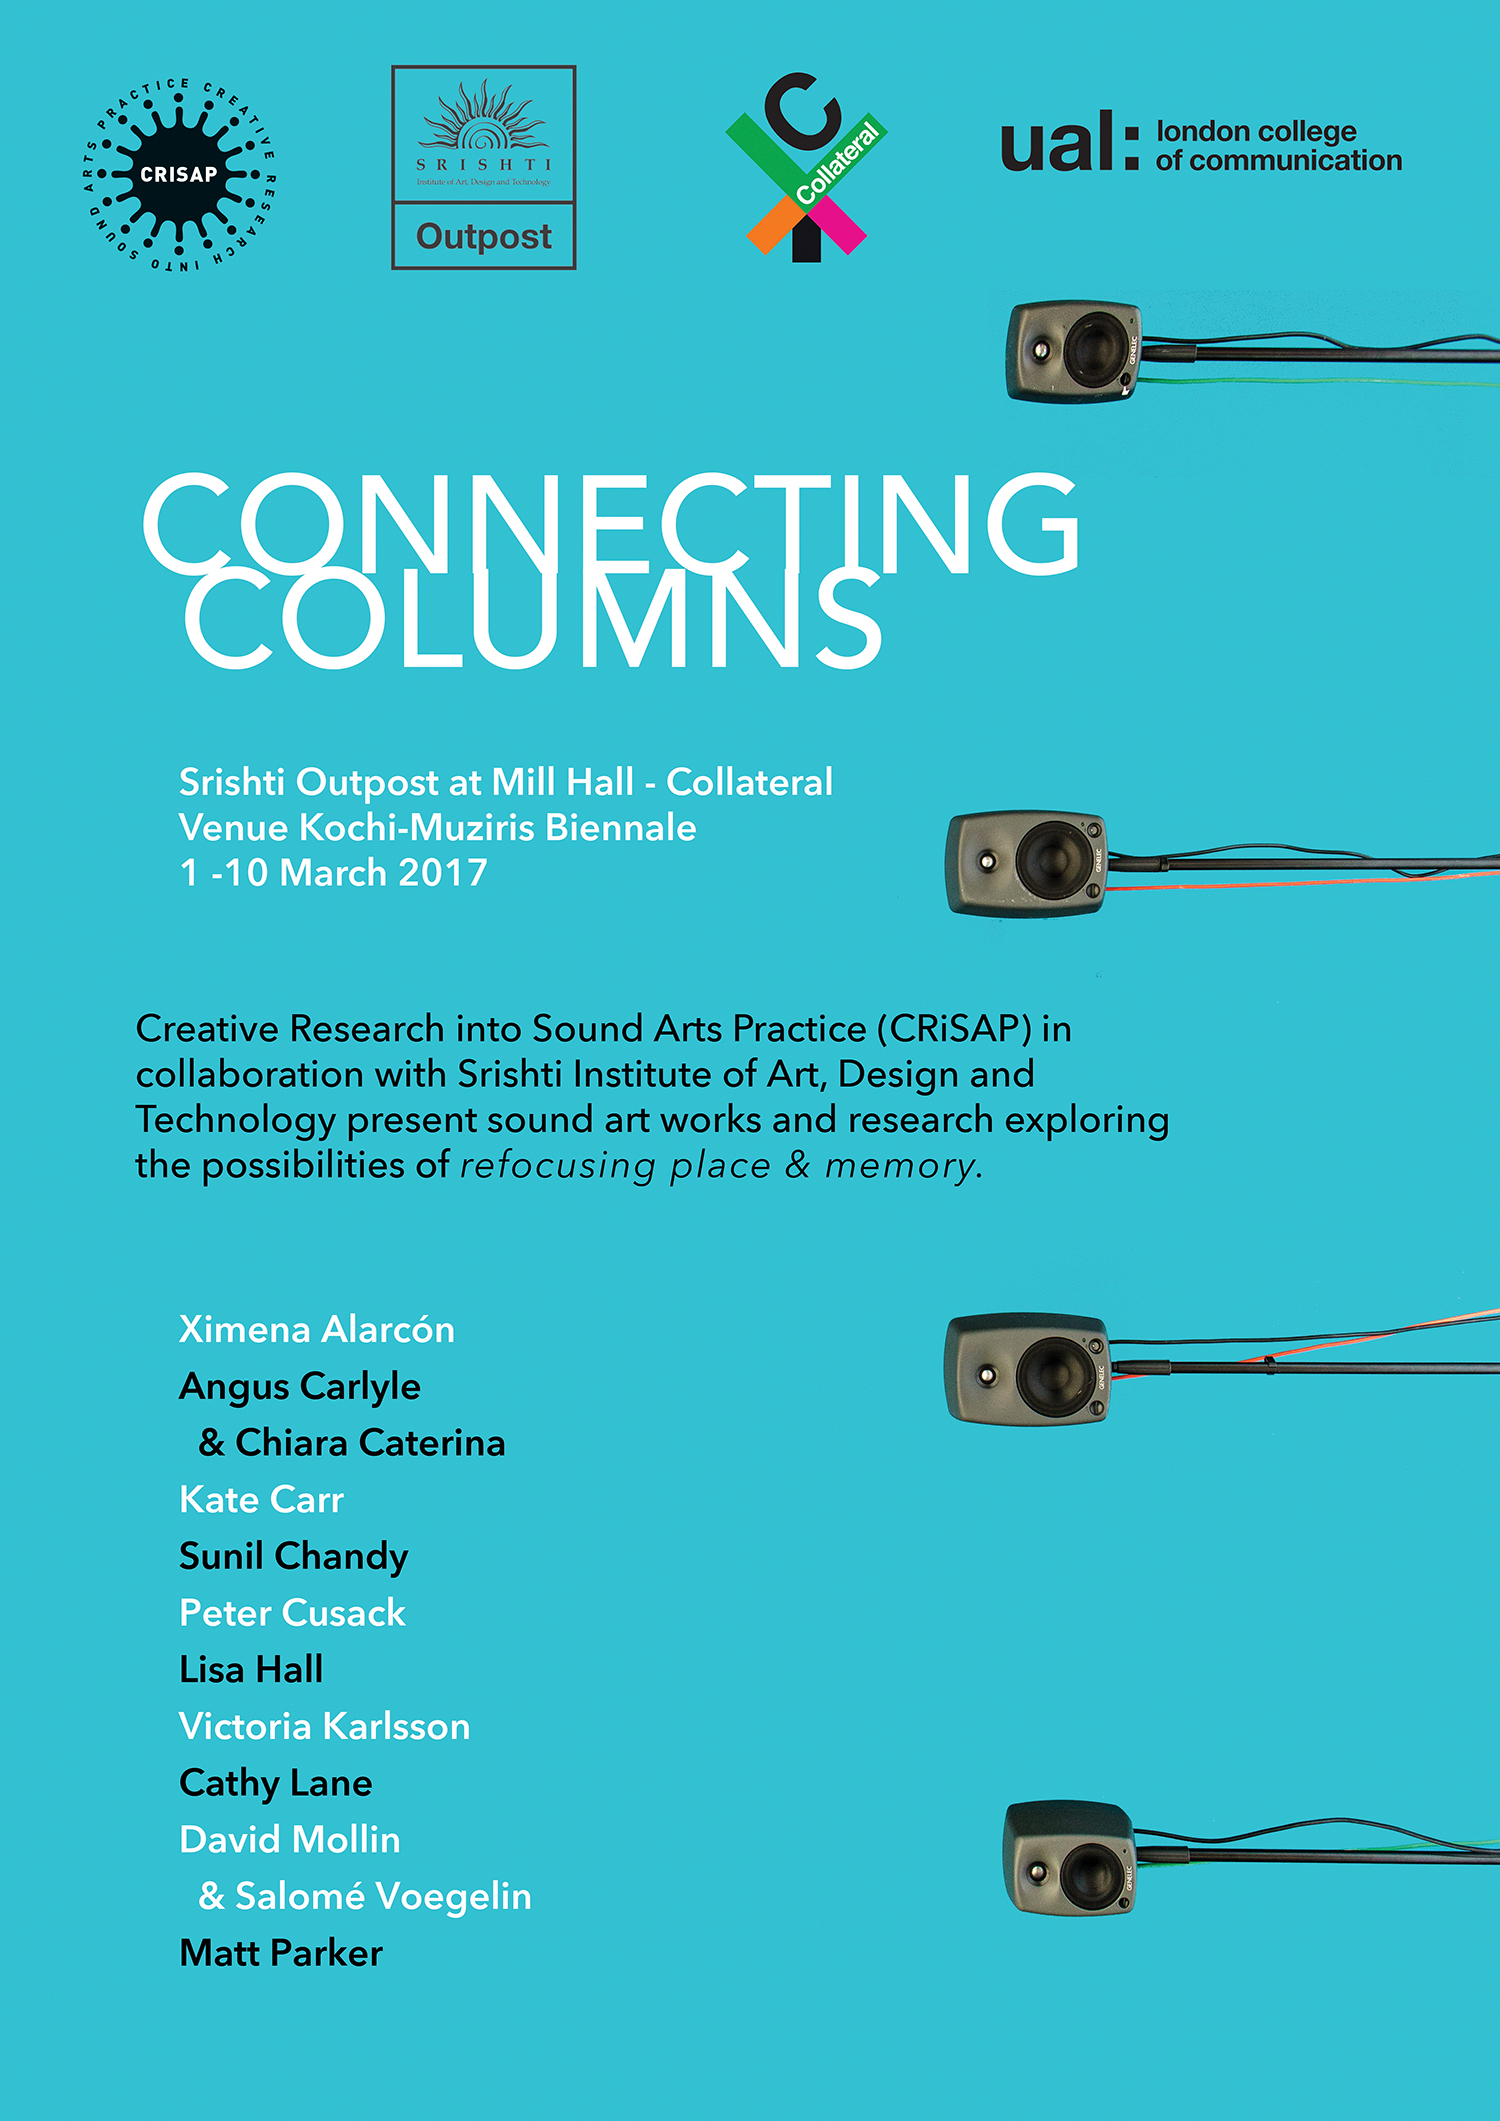 Poster "Connecting Columns" with location, logos, artists names